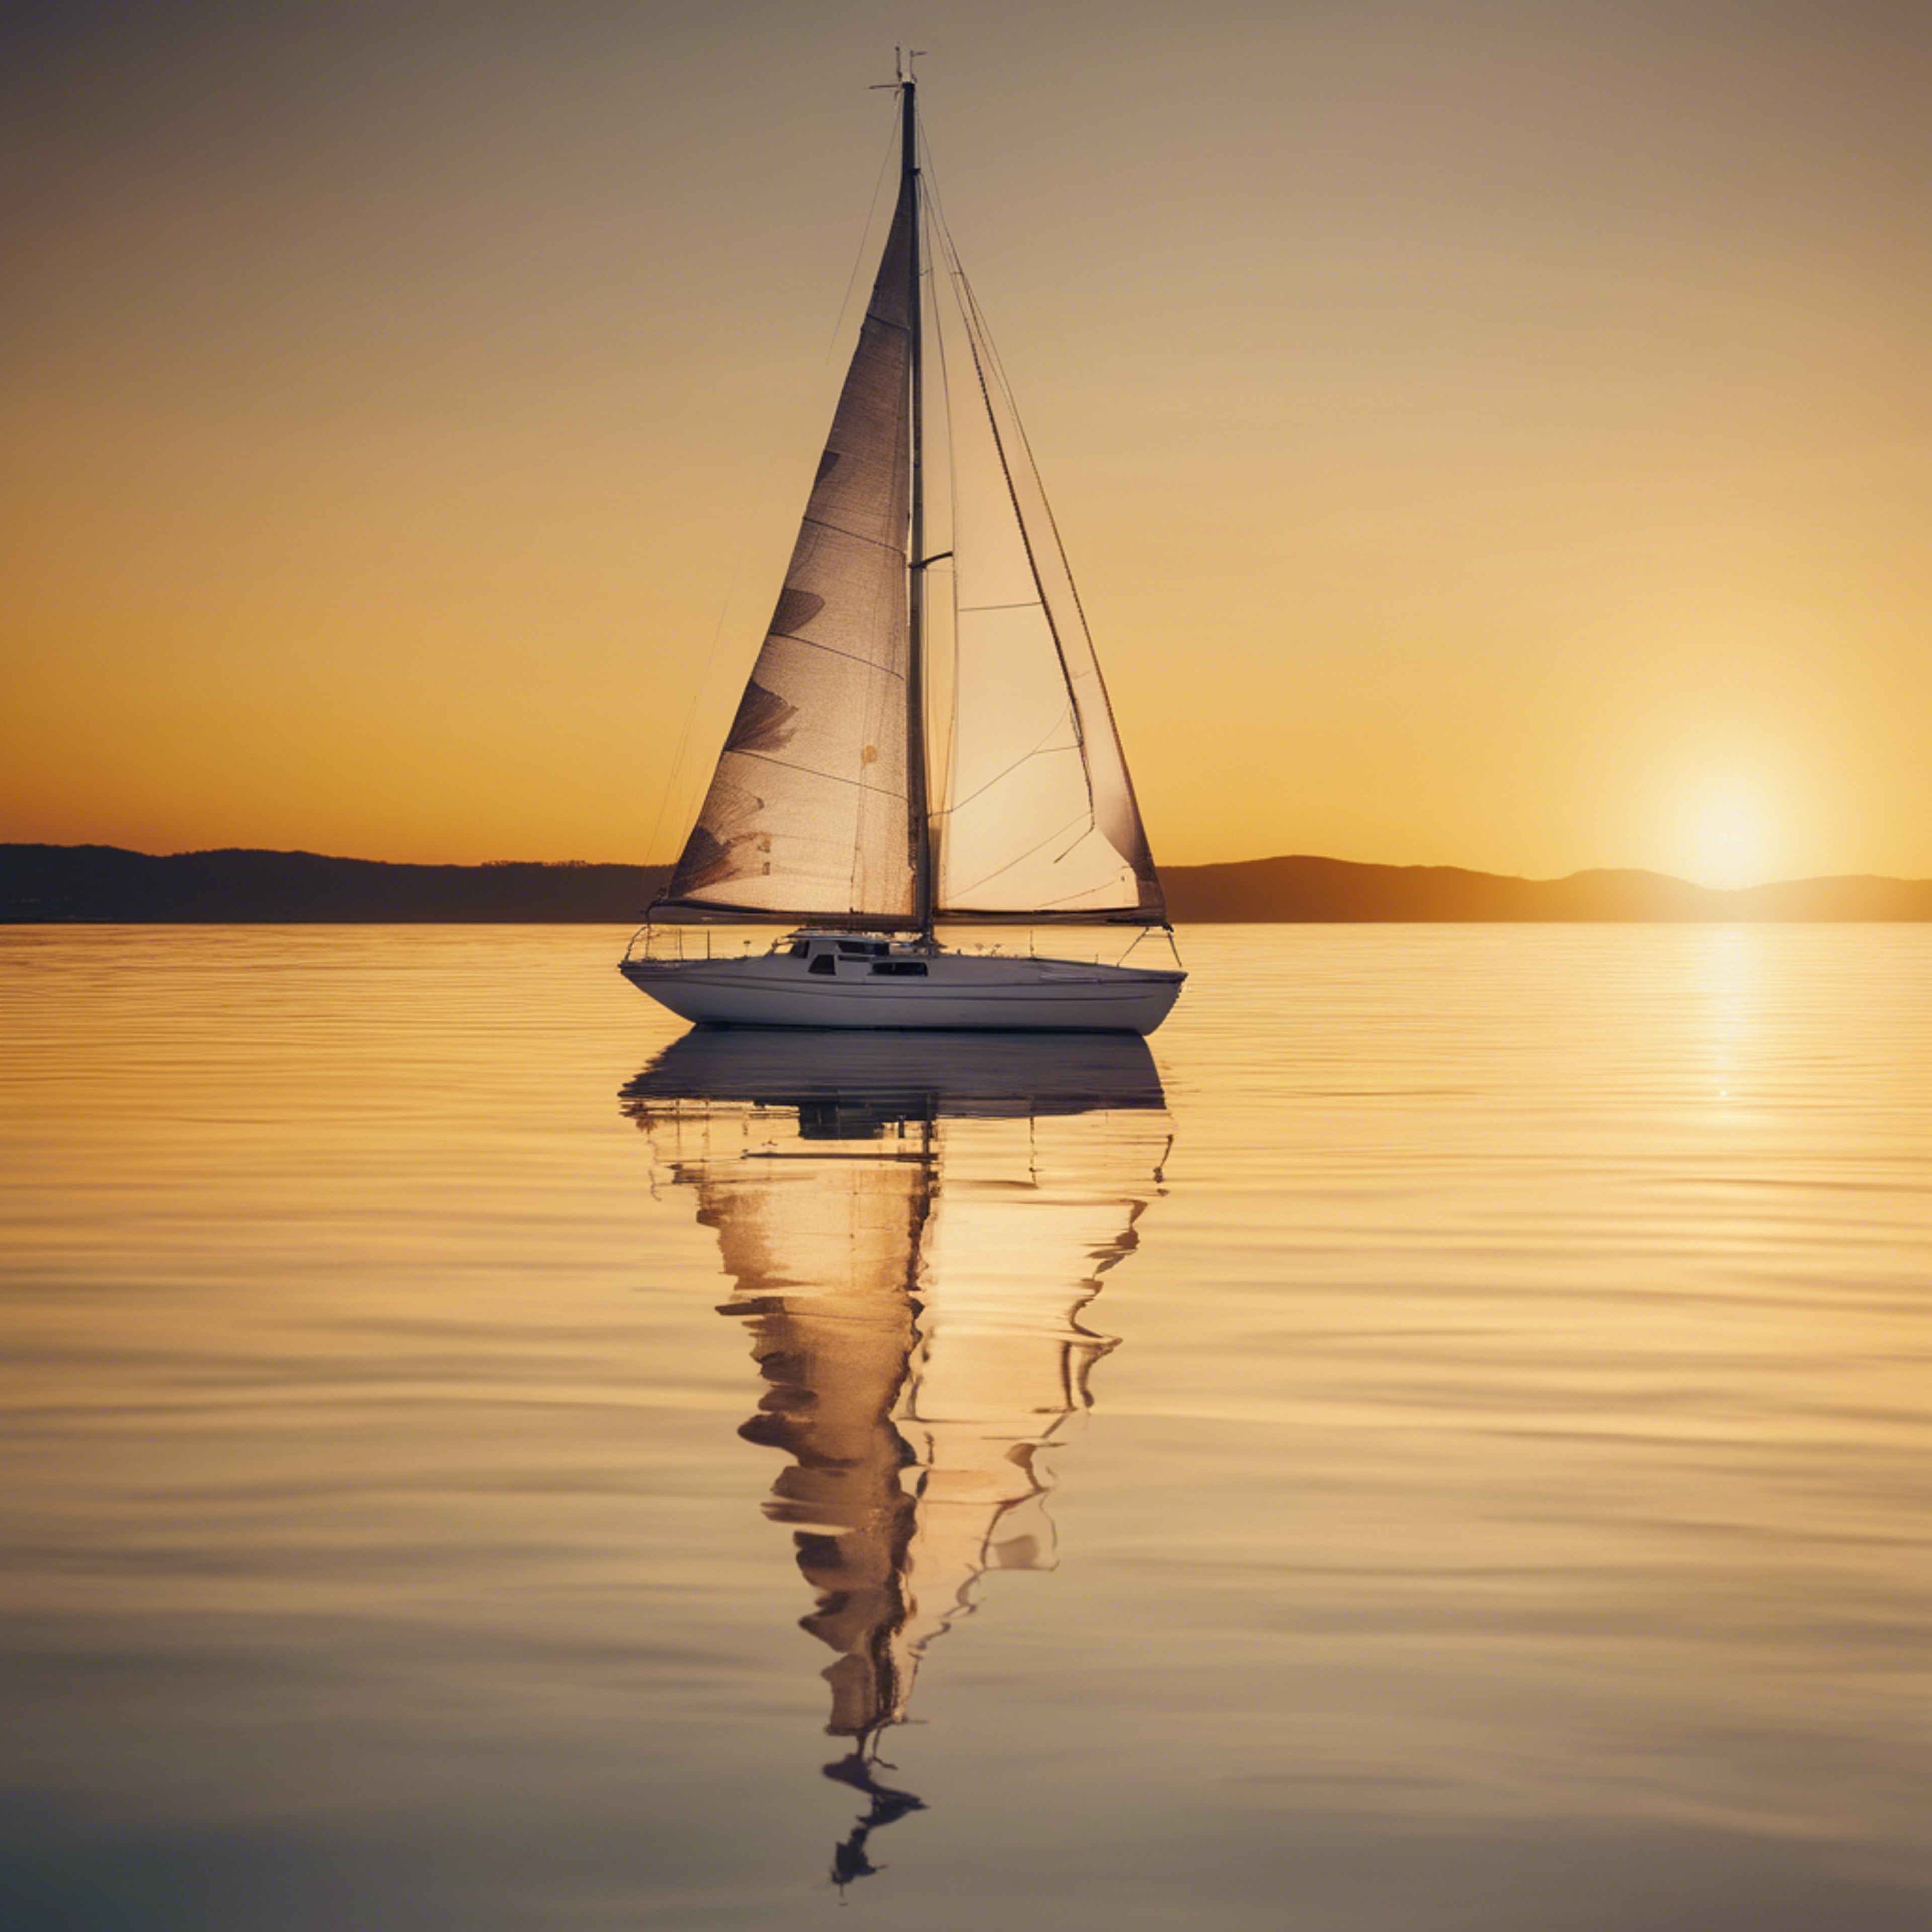 A picturesque scene of a white sailboat floating on a sea of shimmering yellow gold at sunset. Wallpaper[7609f41ea04949c9a6f7]